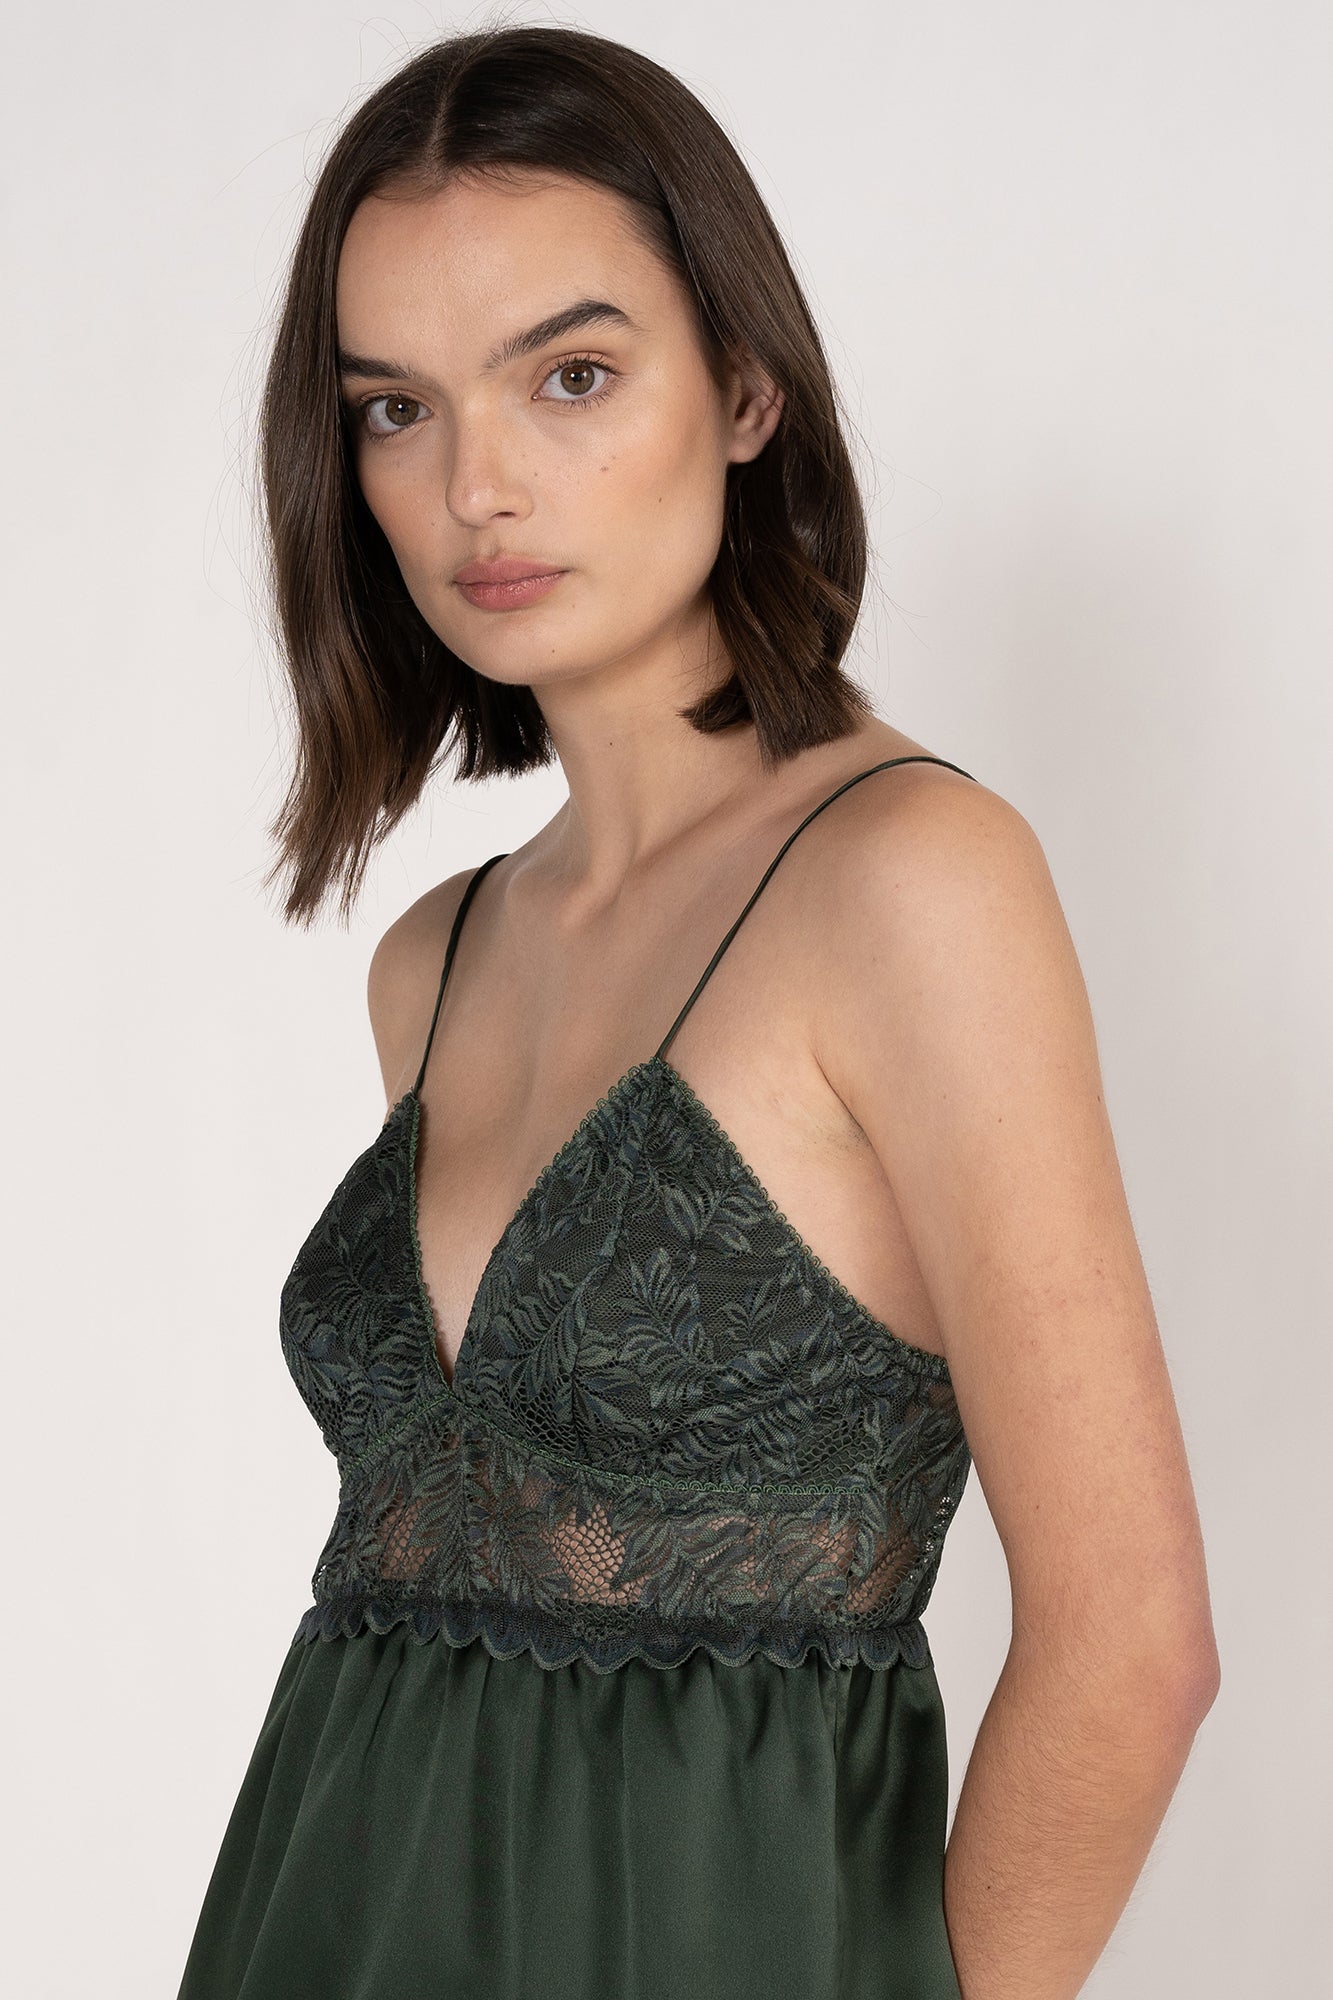 Stretch Lace Cami in Ivy from Ginia Sleep